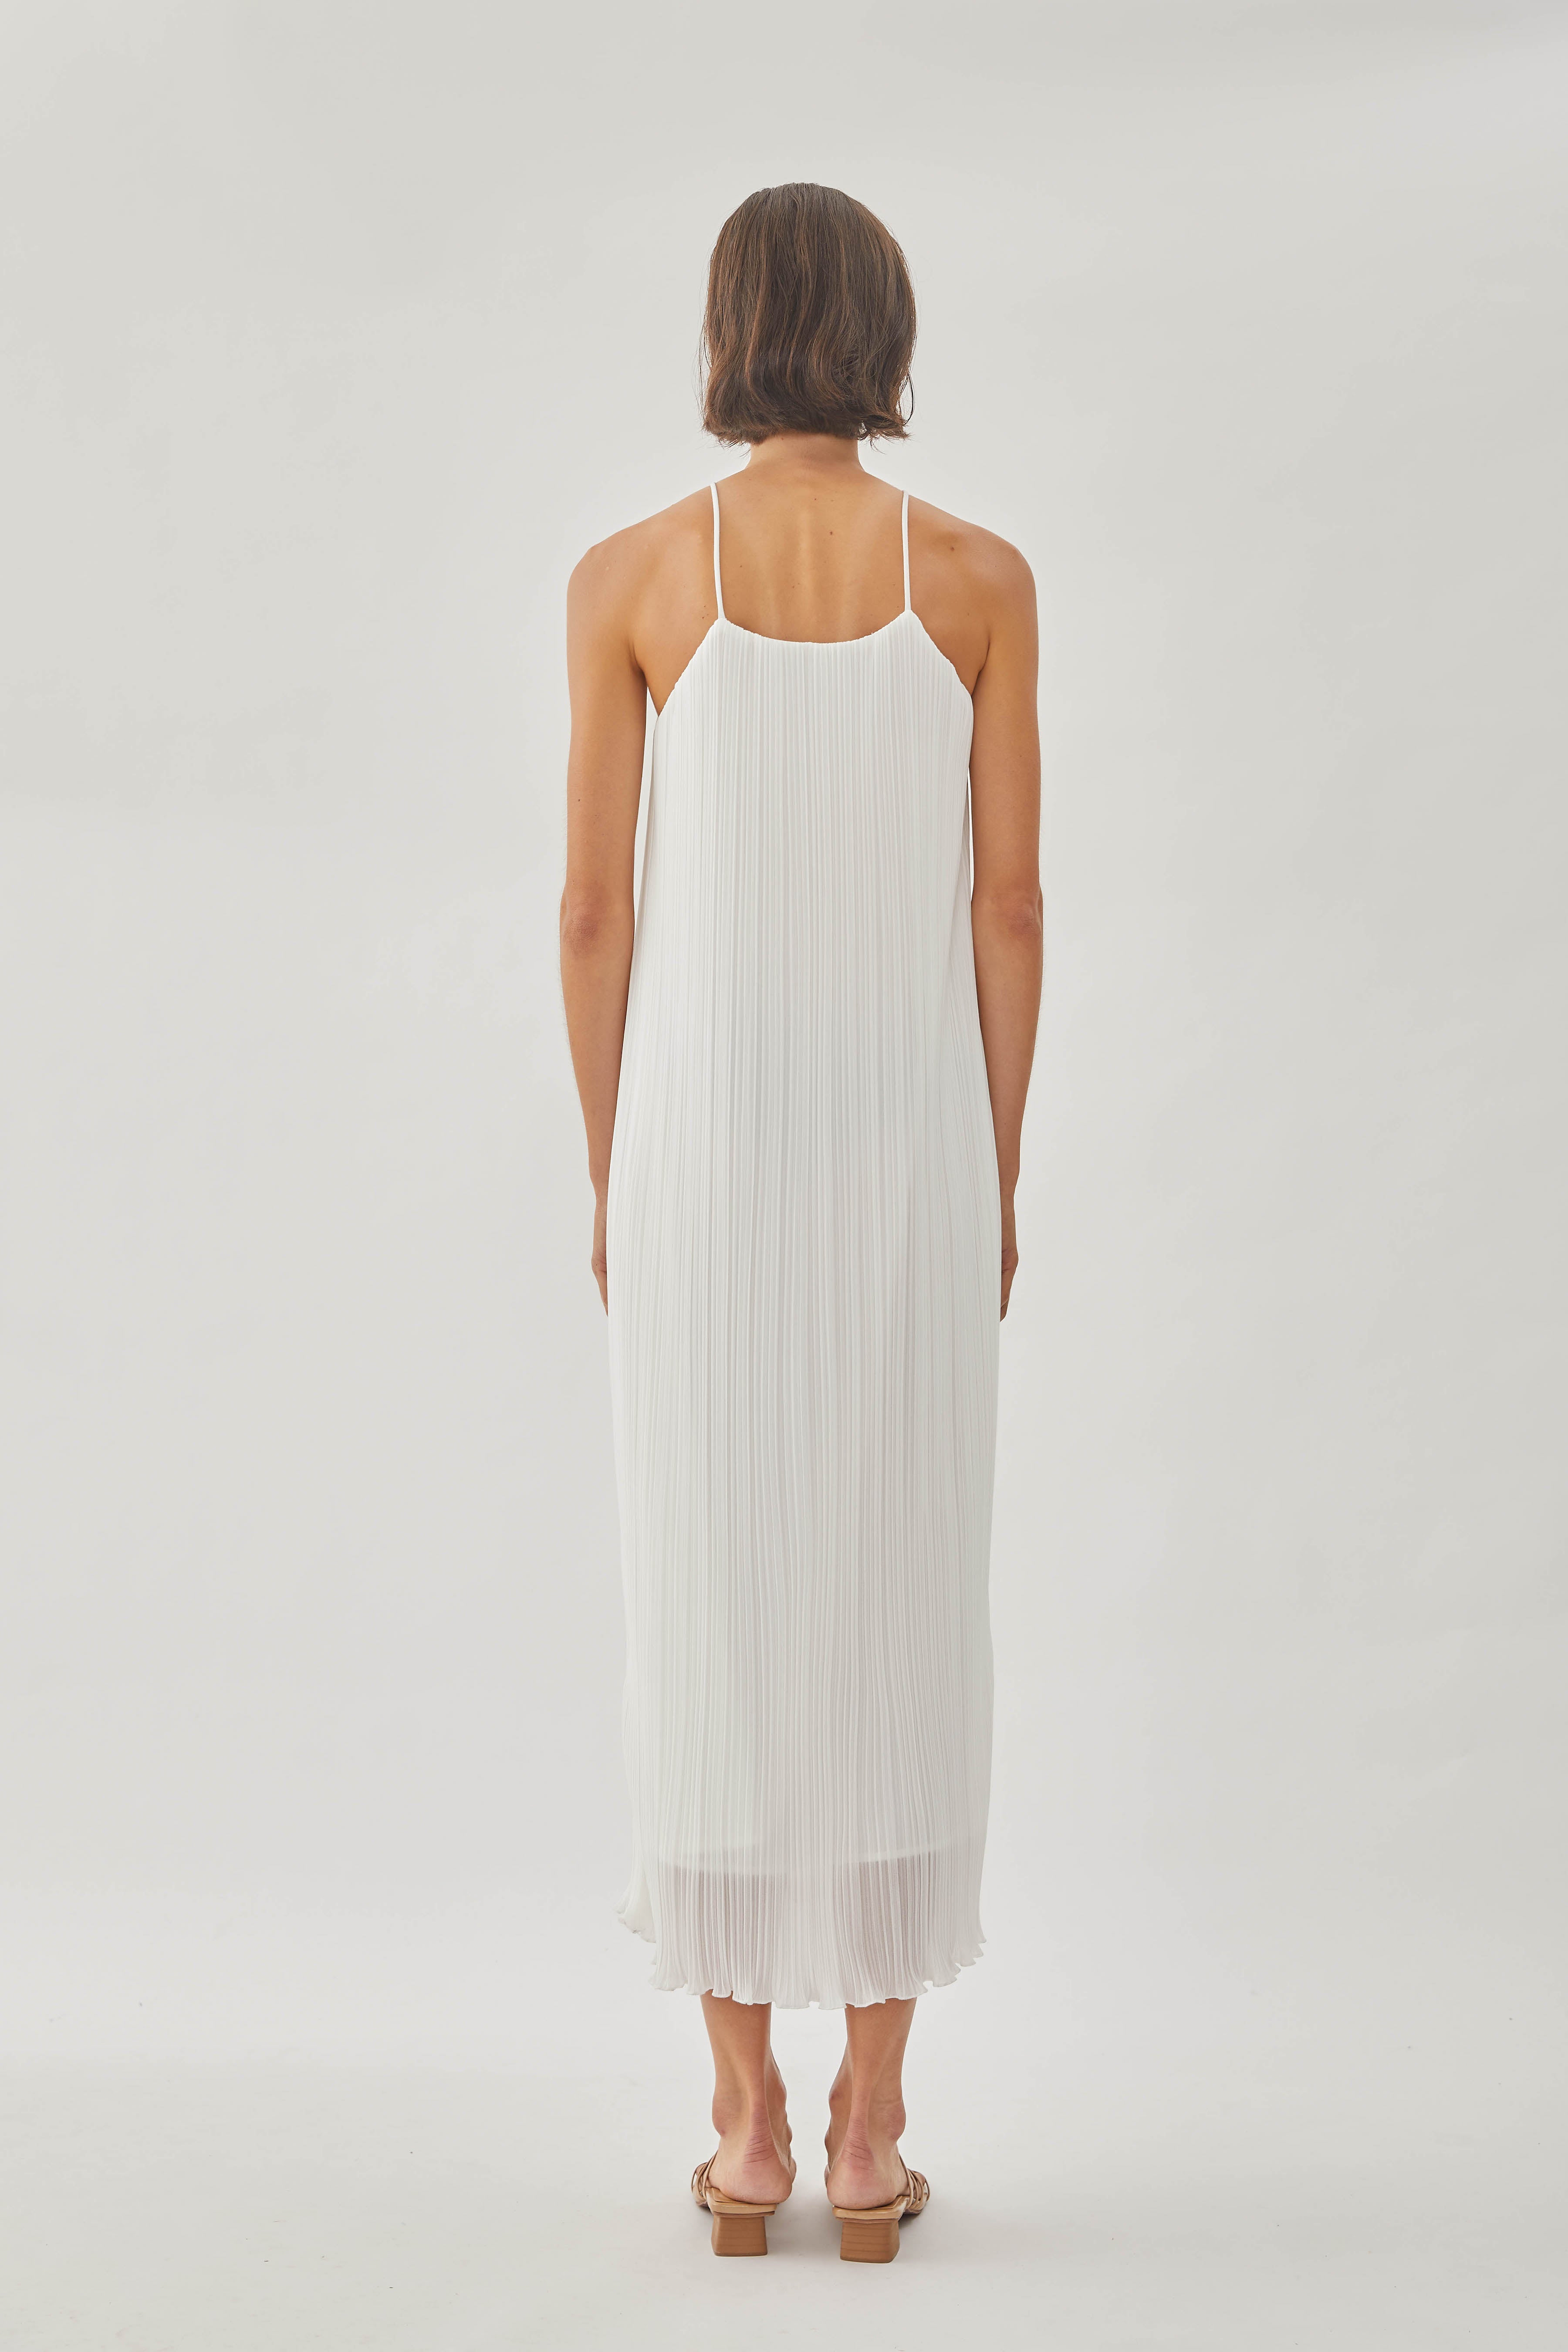 Halter Pleated Maxi Dress in White